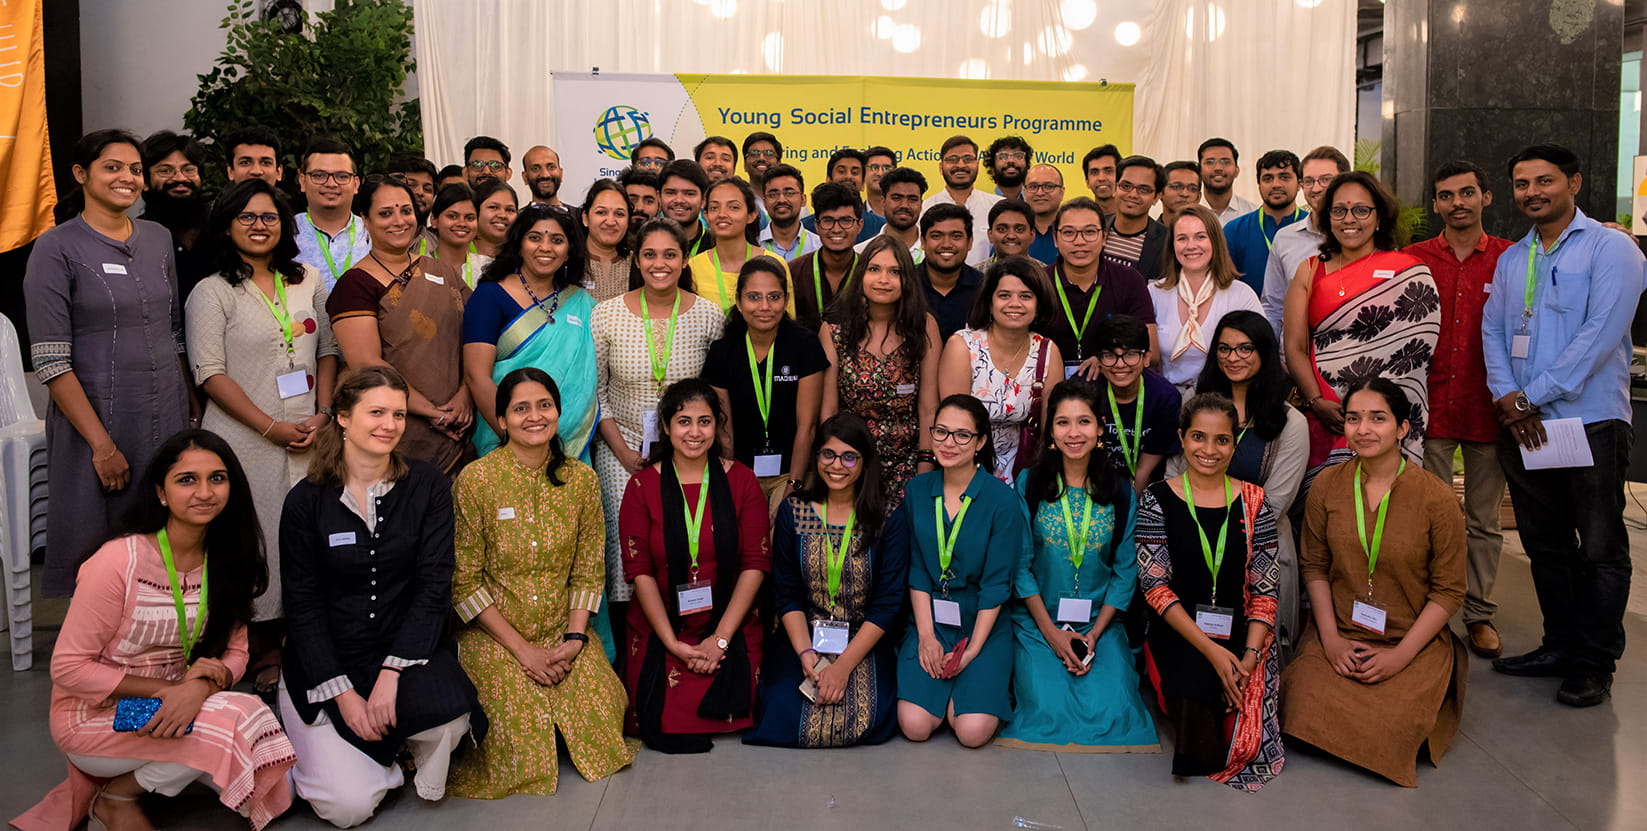 24 mentors from Singapore and India pose for a group photo with the YSEs during the Business Clinic session